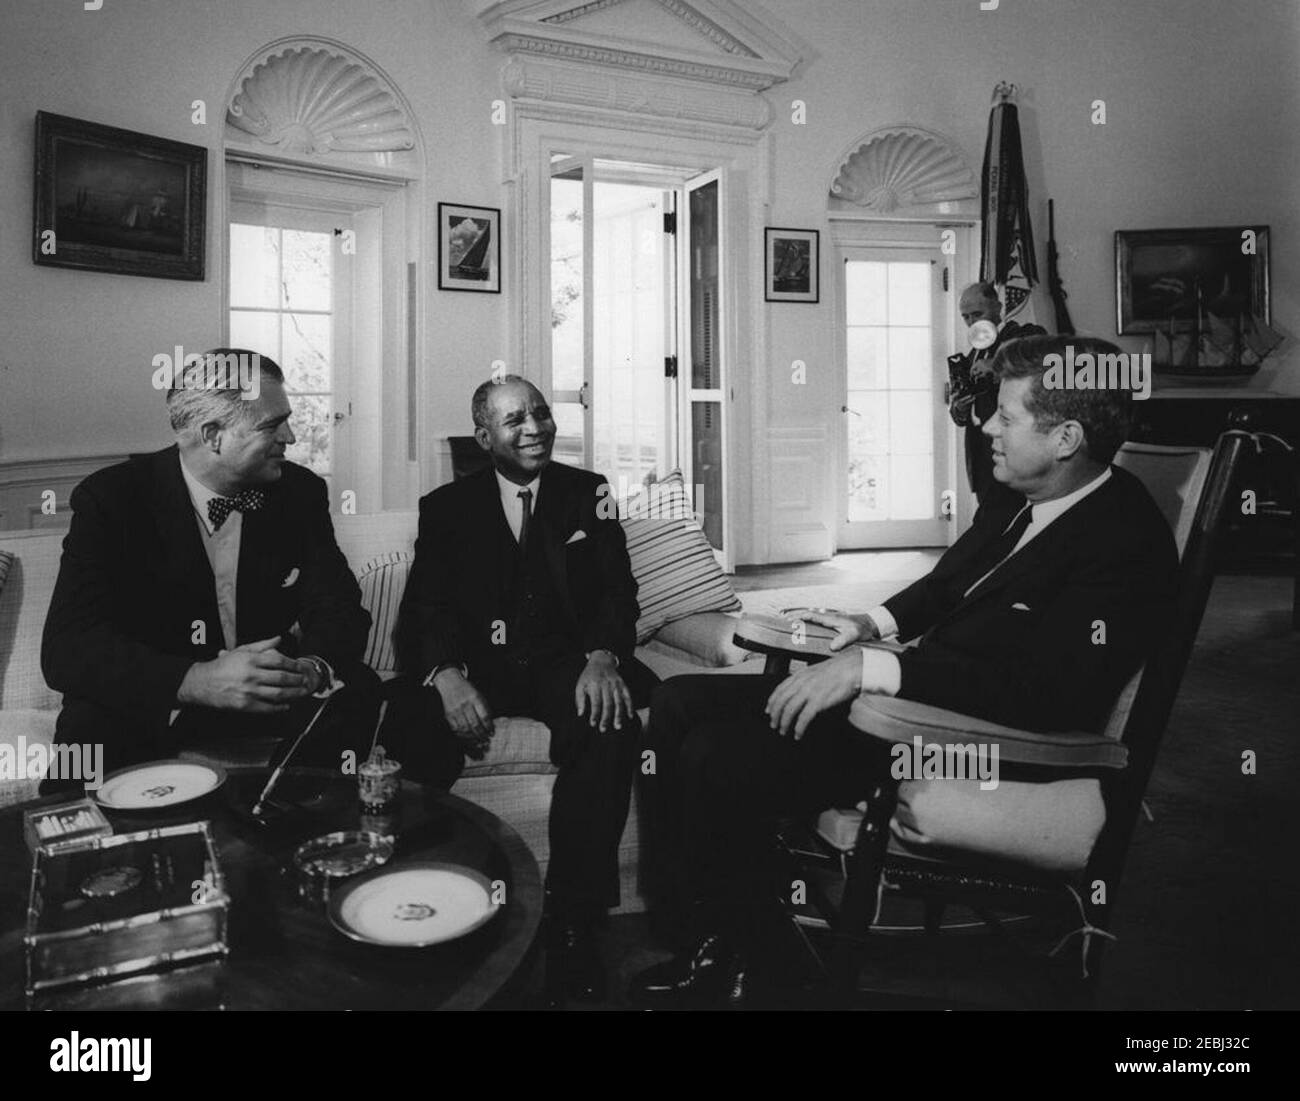 Meeting with Hastings Kamuzu Banda, Prime Minister of Nyasaland, 10:45AM. President John F. Kennedy (in rocking chair) meets with Prime Minister of Nyasaland, H. Kamuzu Banda. Assistant Secretary of State for African Affairs, G. Mennen u0022Soapyu0022 Williams, sits at far left. An unidentified photographer stands in background. Oval Office, White House, Washington, D.C. Stock Photo